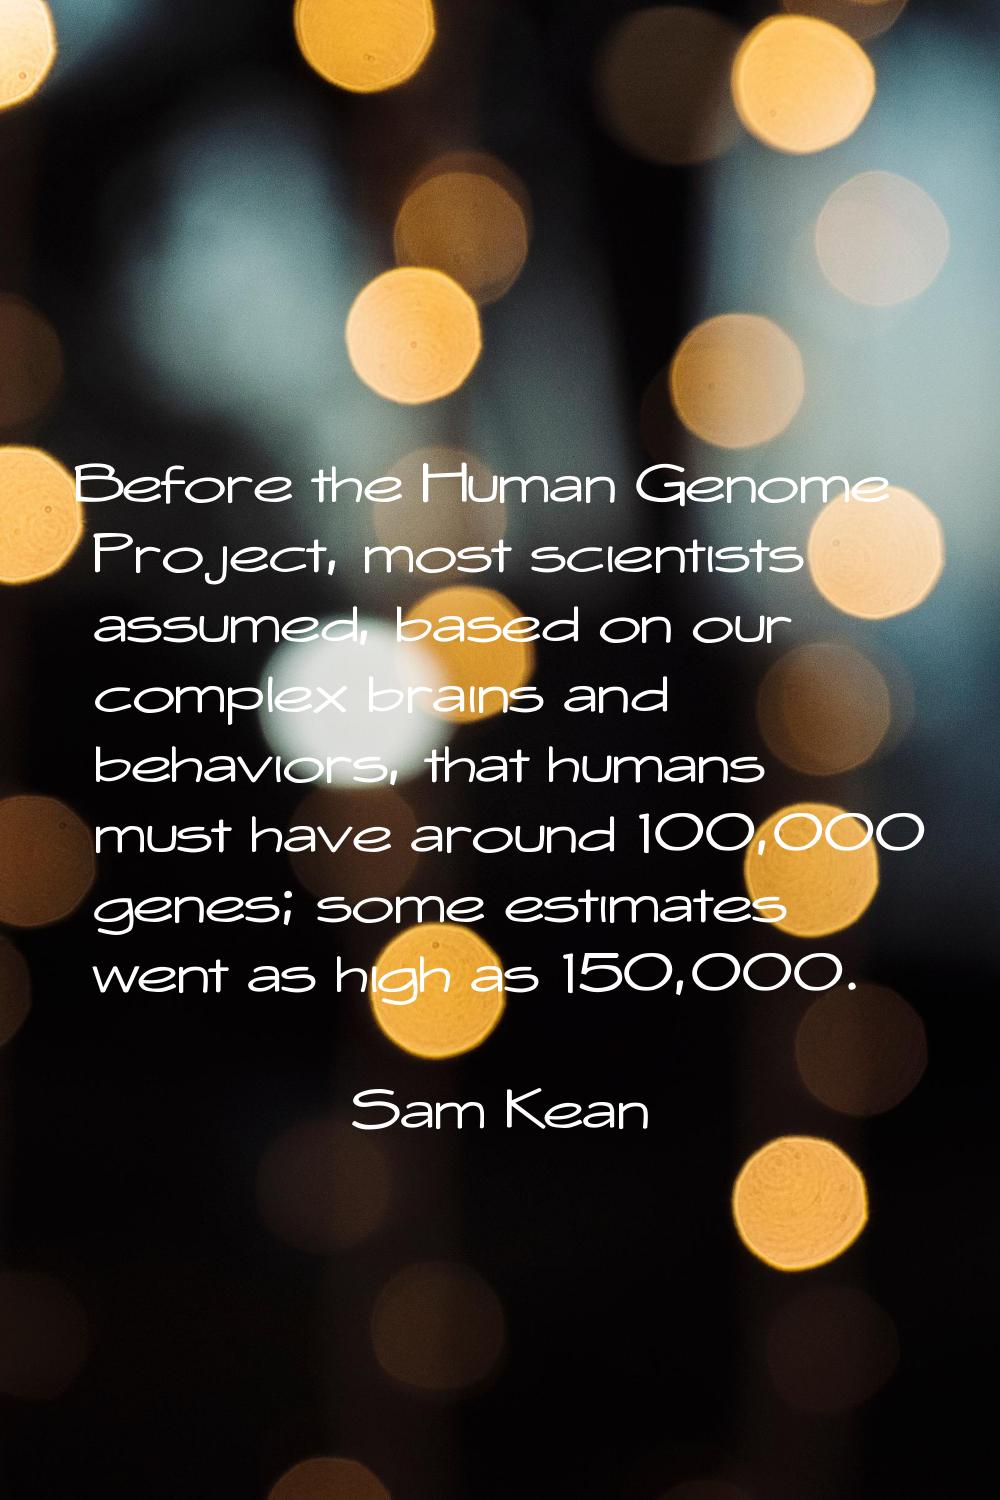 Before the Human Genome Project, most scientists assumed, based on our complex brains and behaviors